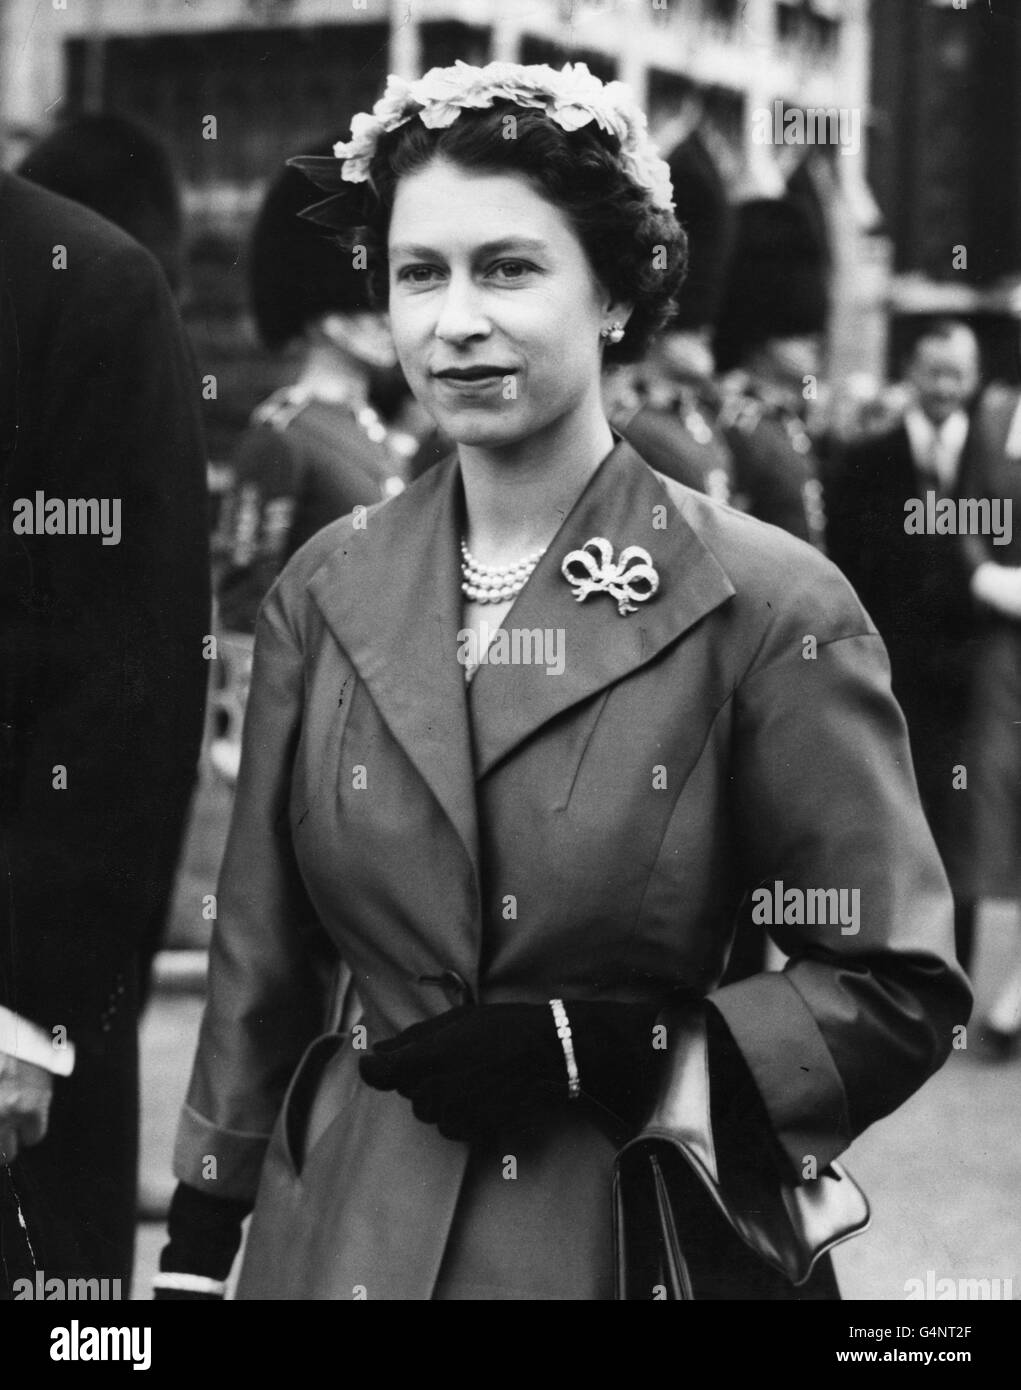 Queen Elizabeth II leaving the wedding of her cousin Fergus Michael Bowes-Lyon to Mary McCorquodale at St. Margaret's Church, Westminster. Stock Photo